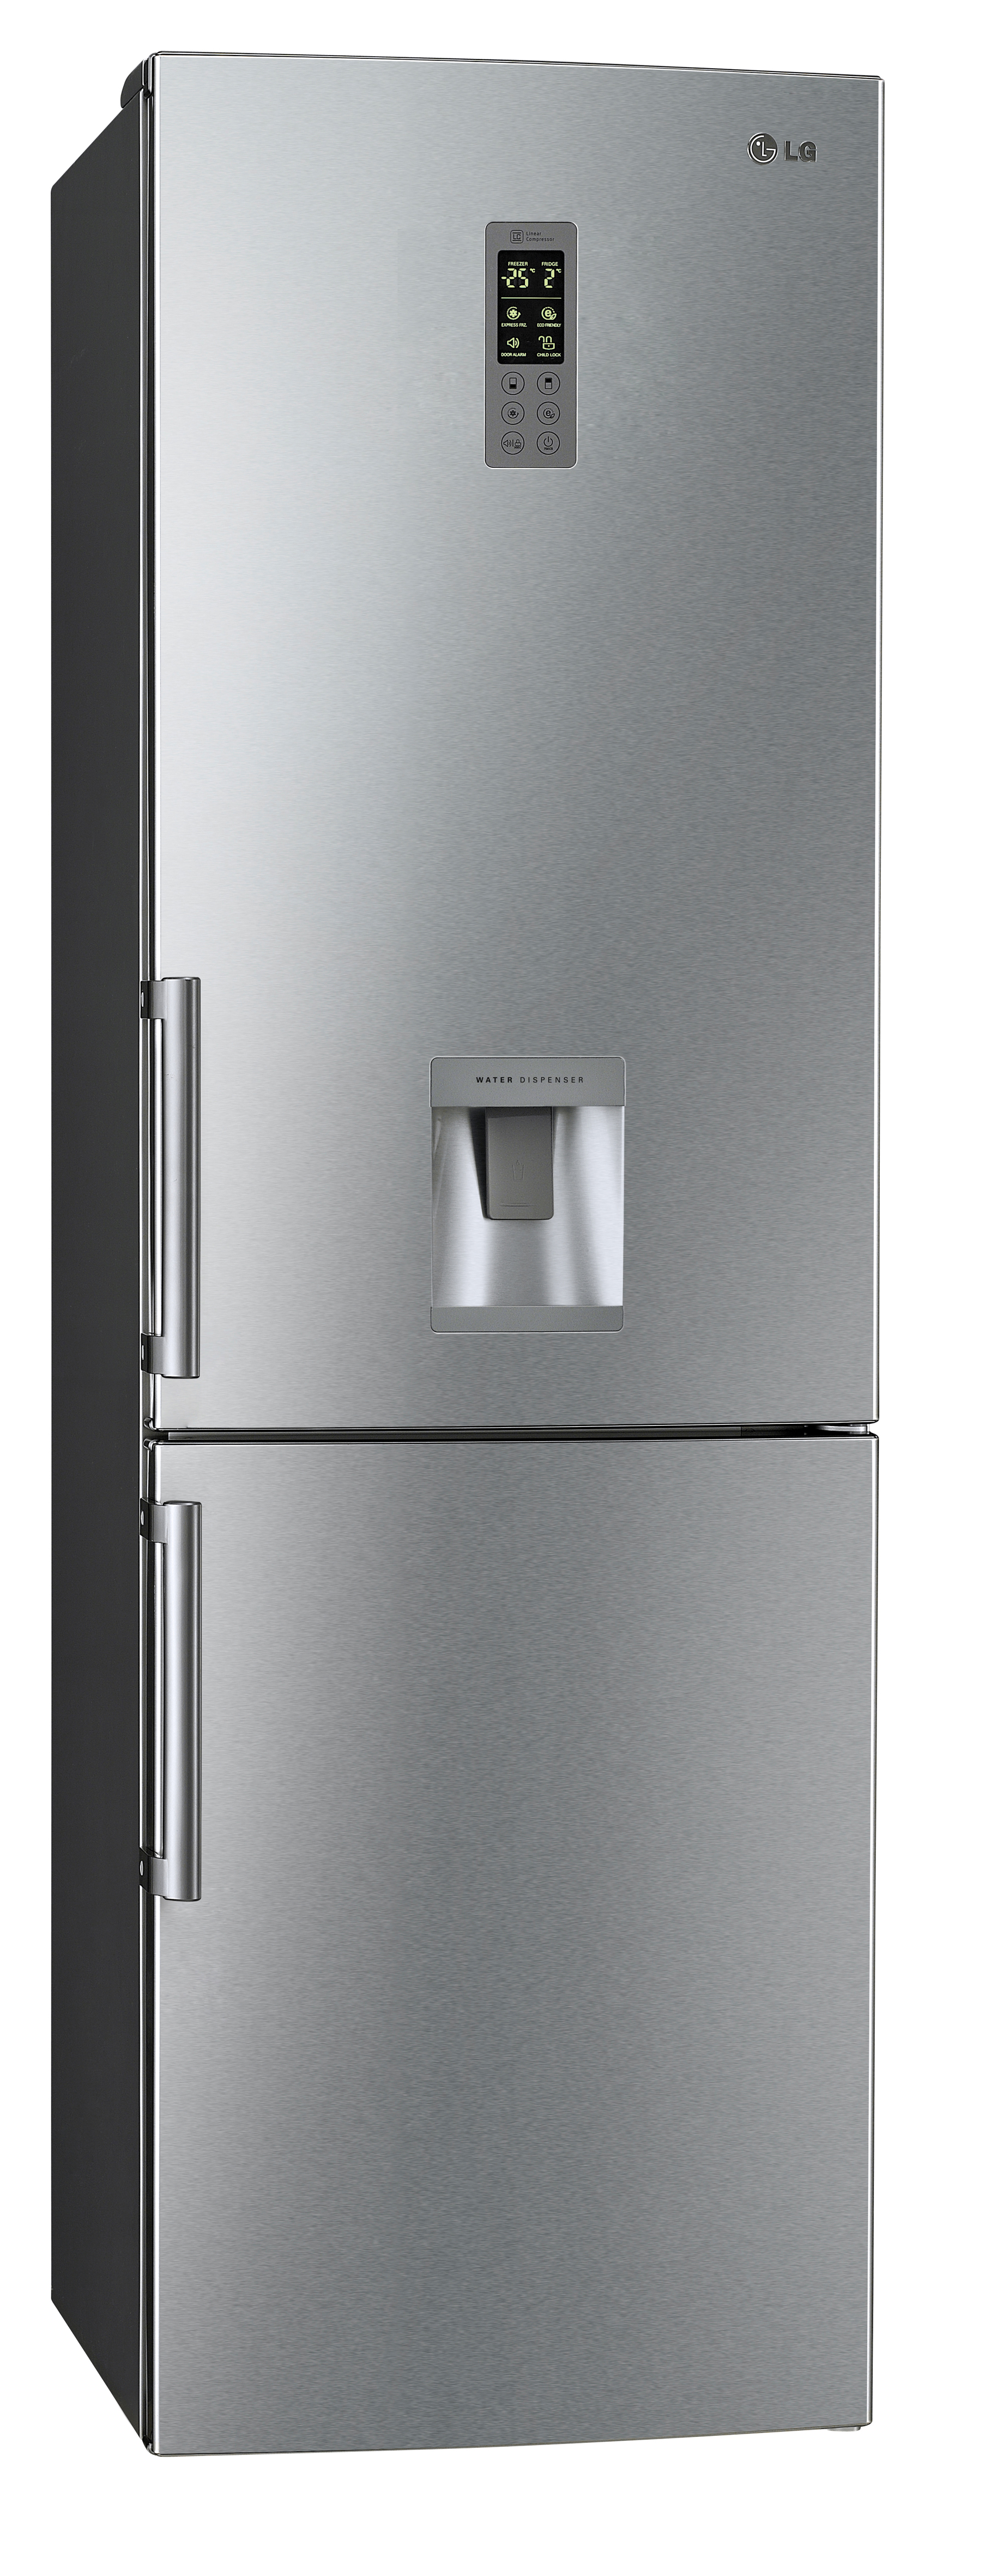 A front view of the LG bottom-freezer refrigerator (model GB5240AVAZ)